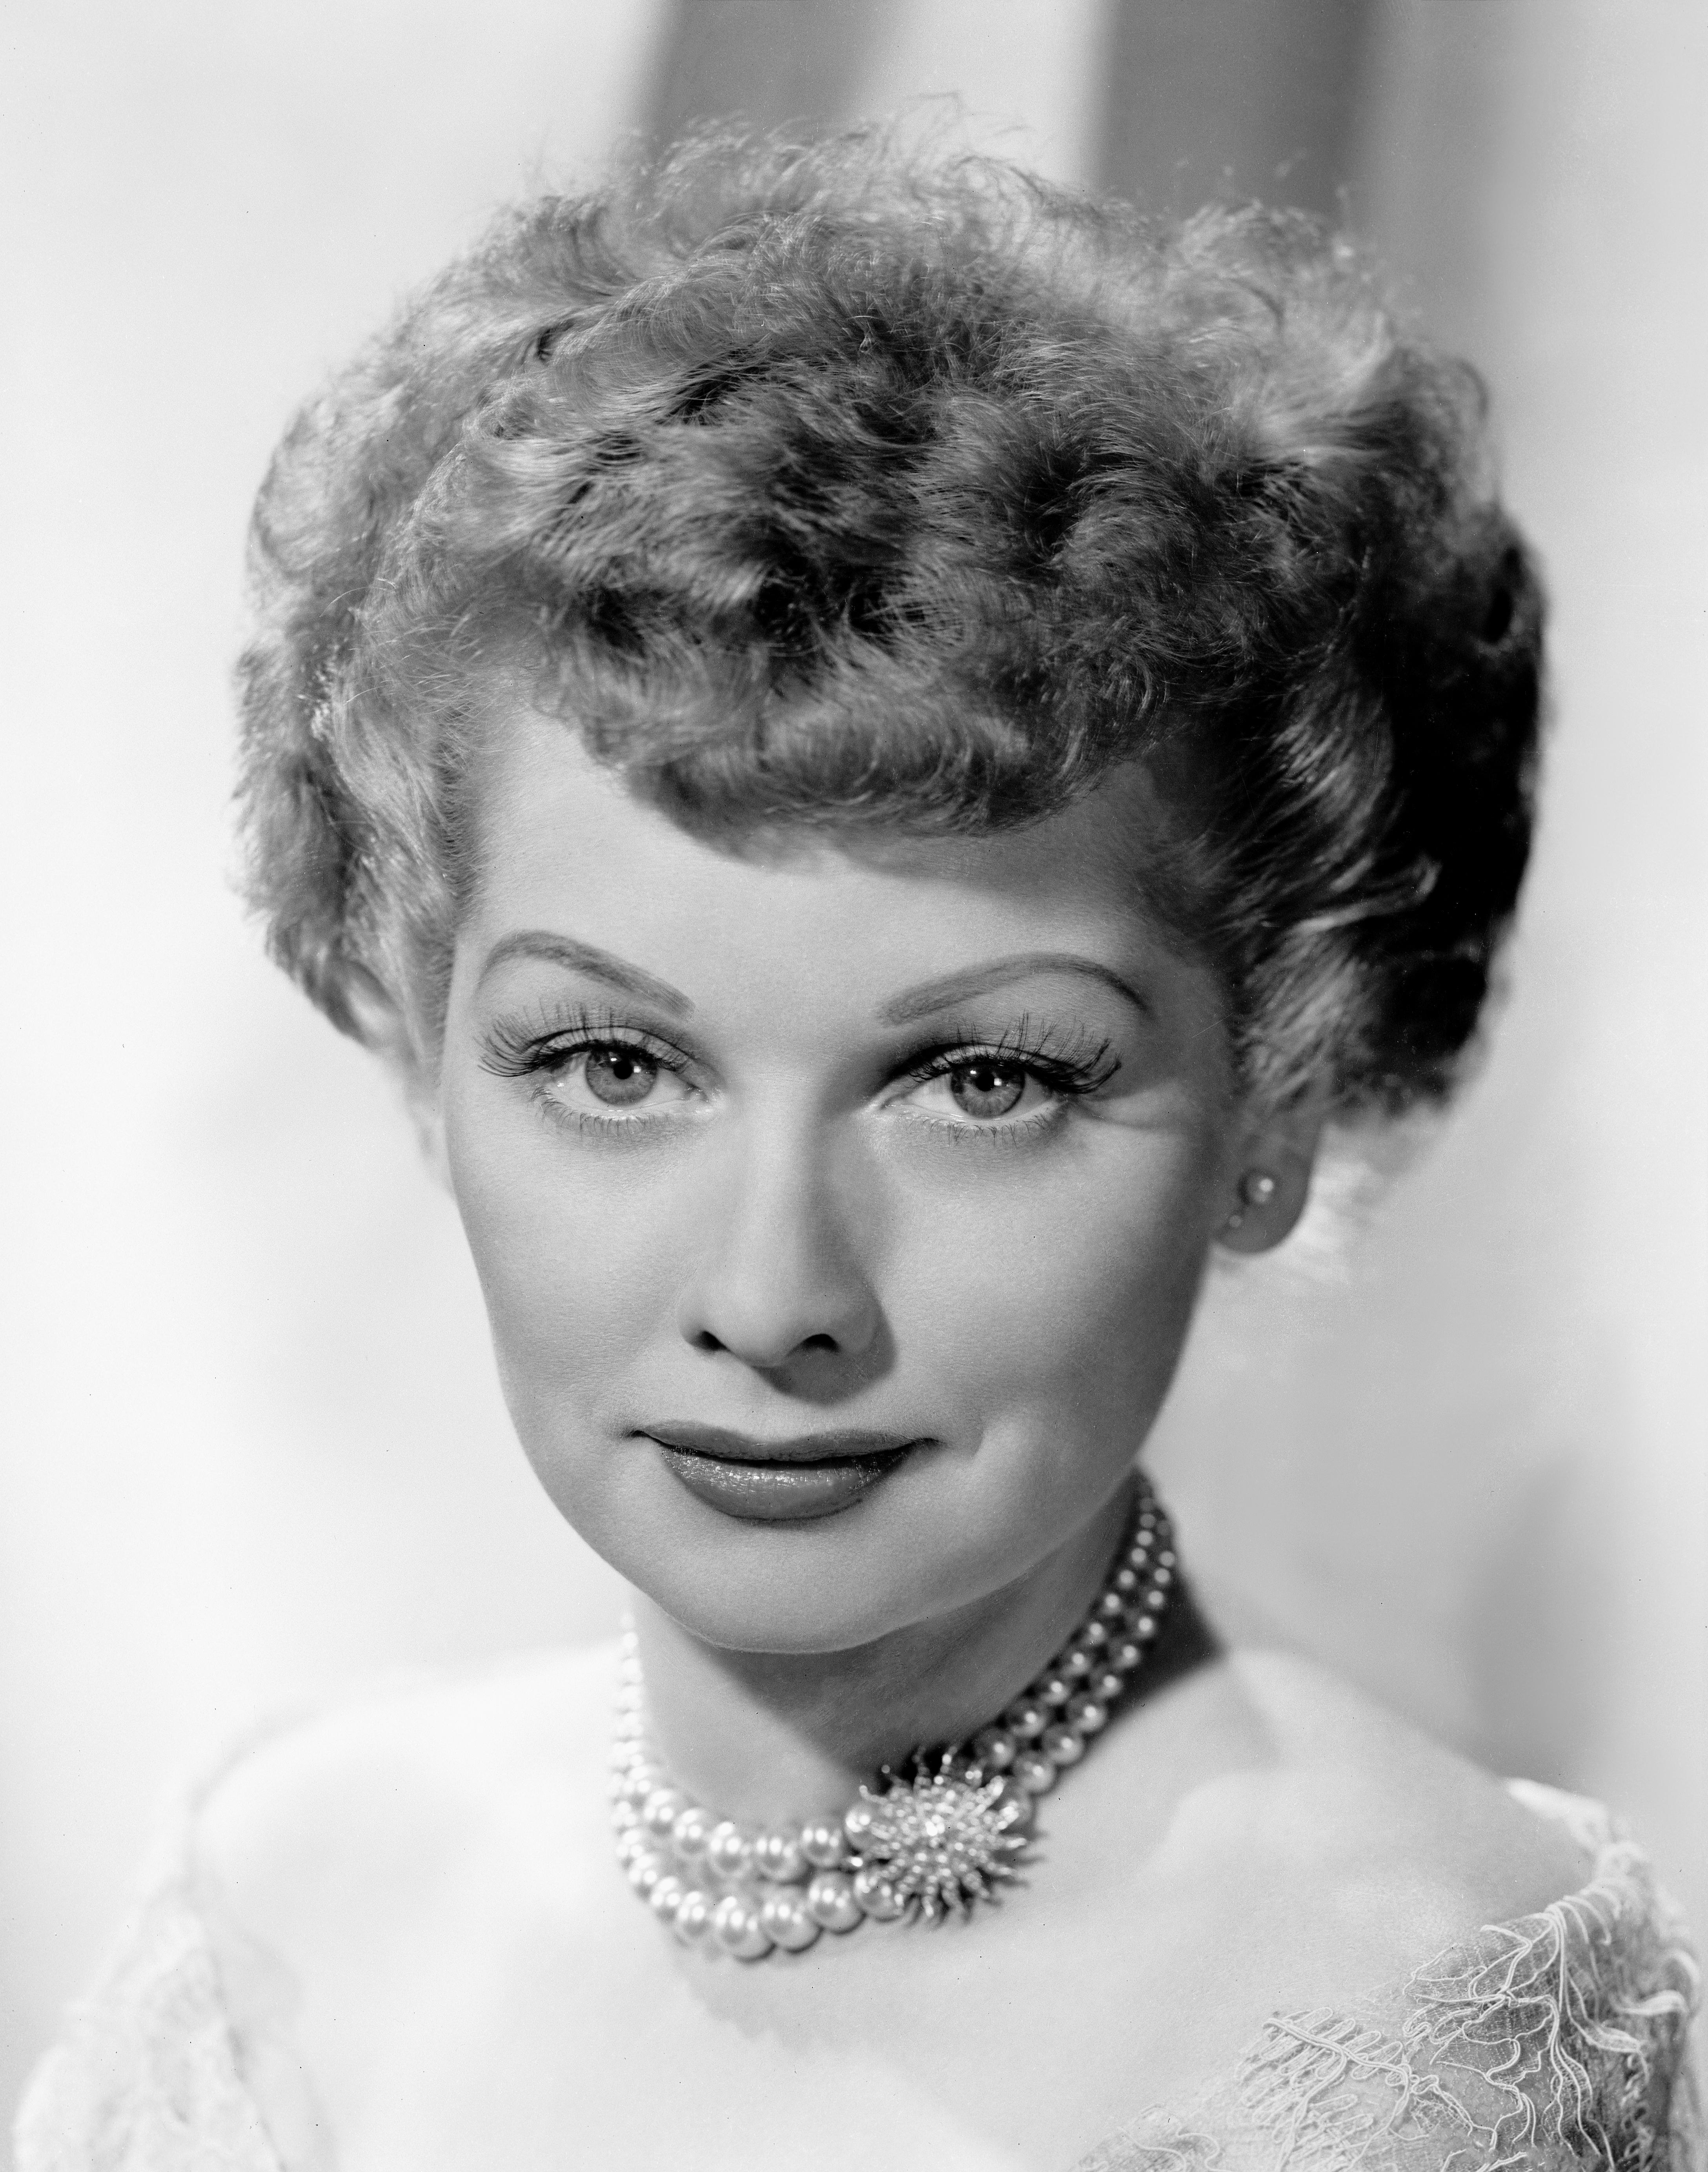 Unknown Portrait Photograph - Lucille Ball in Pearls II Fine Art Print